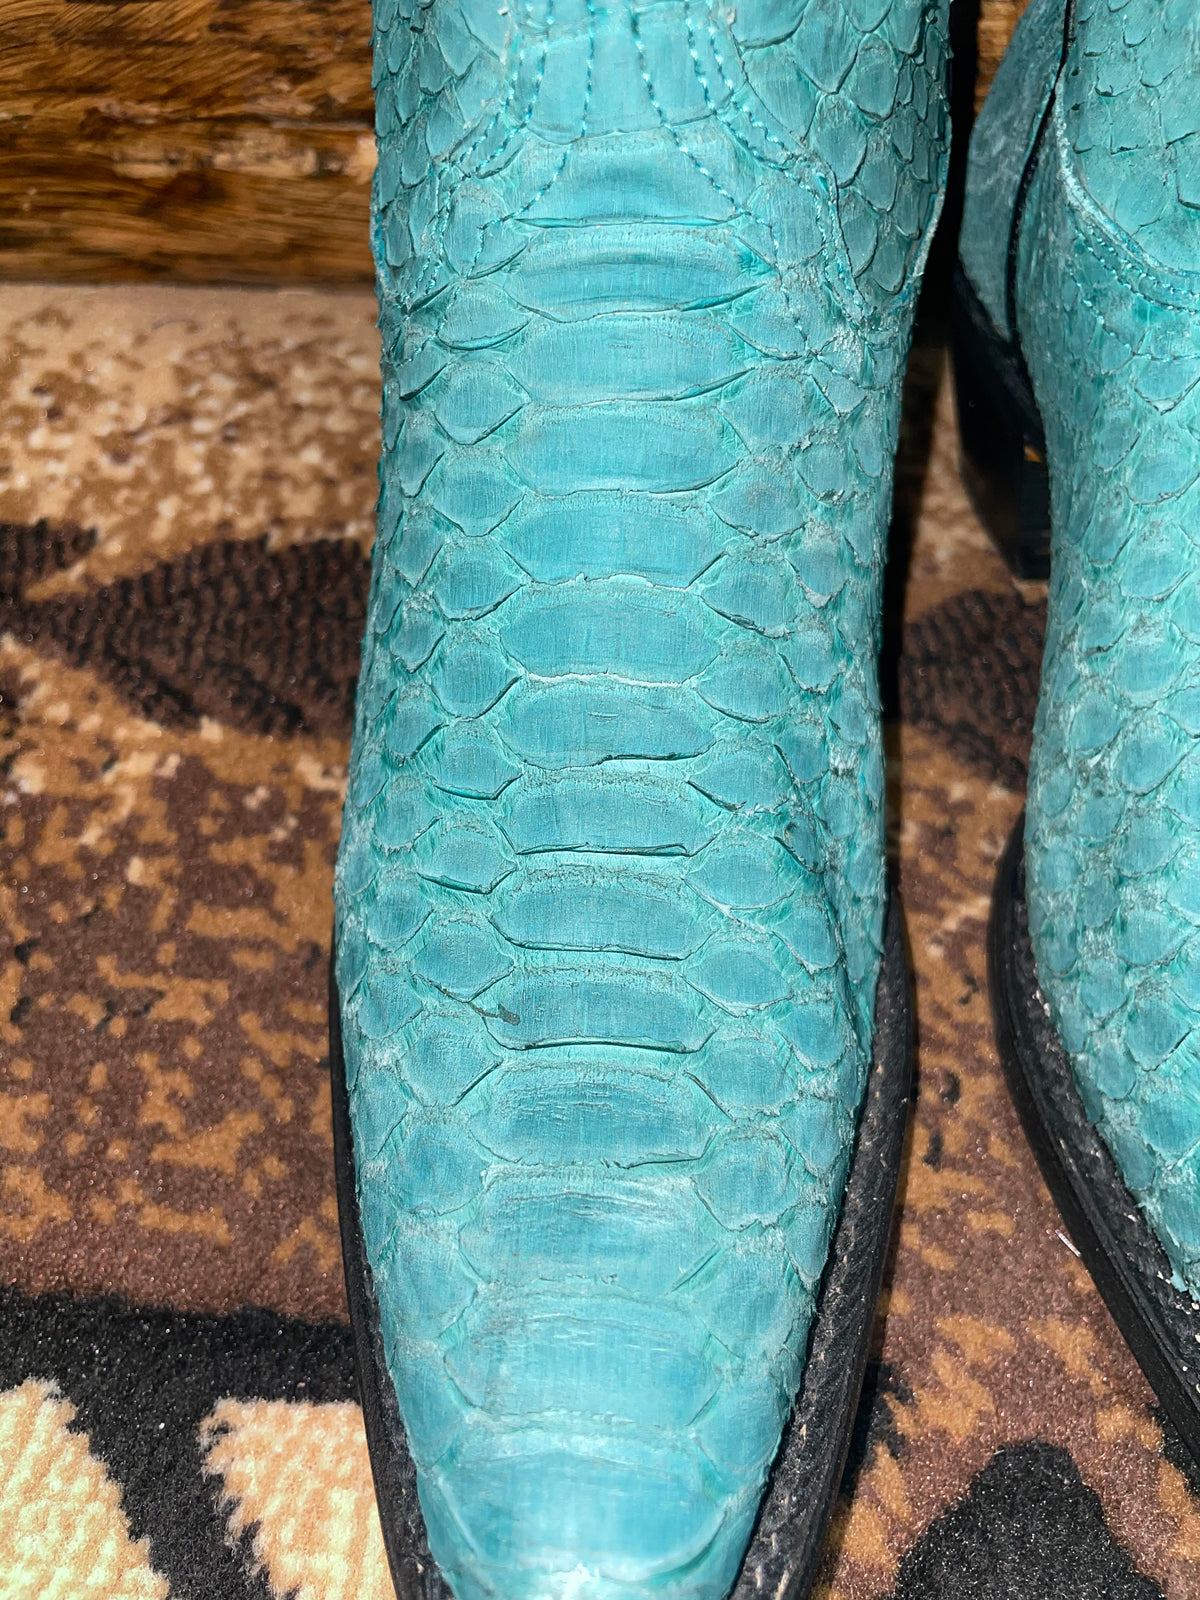 Corral Turquoise Python Booties